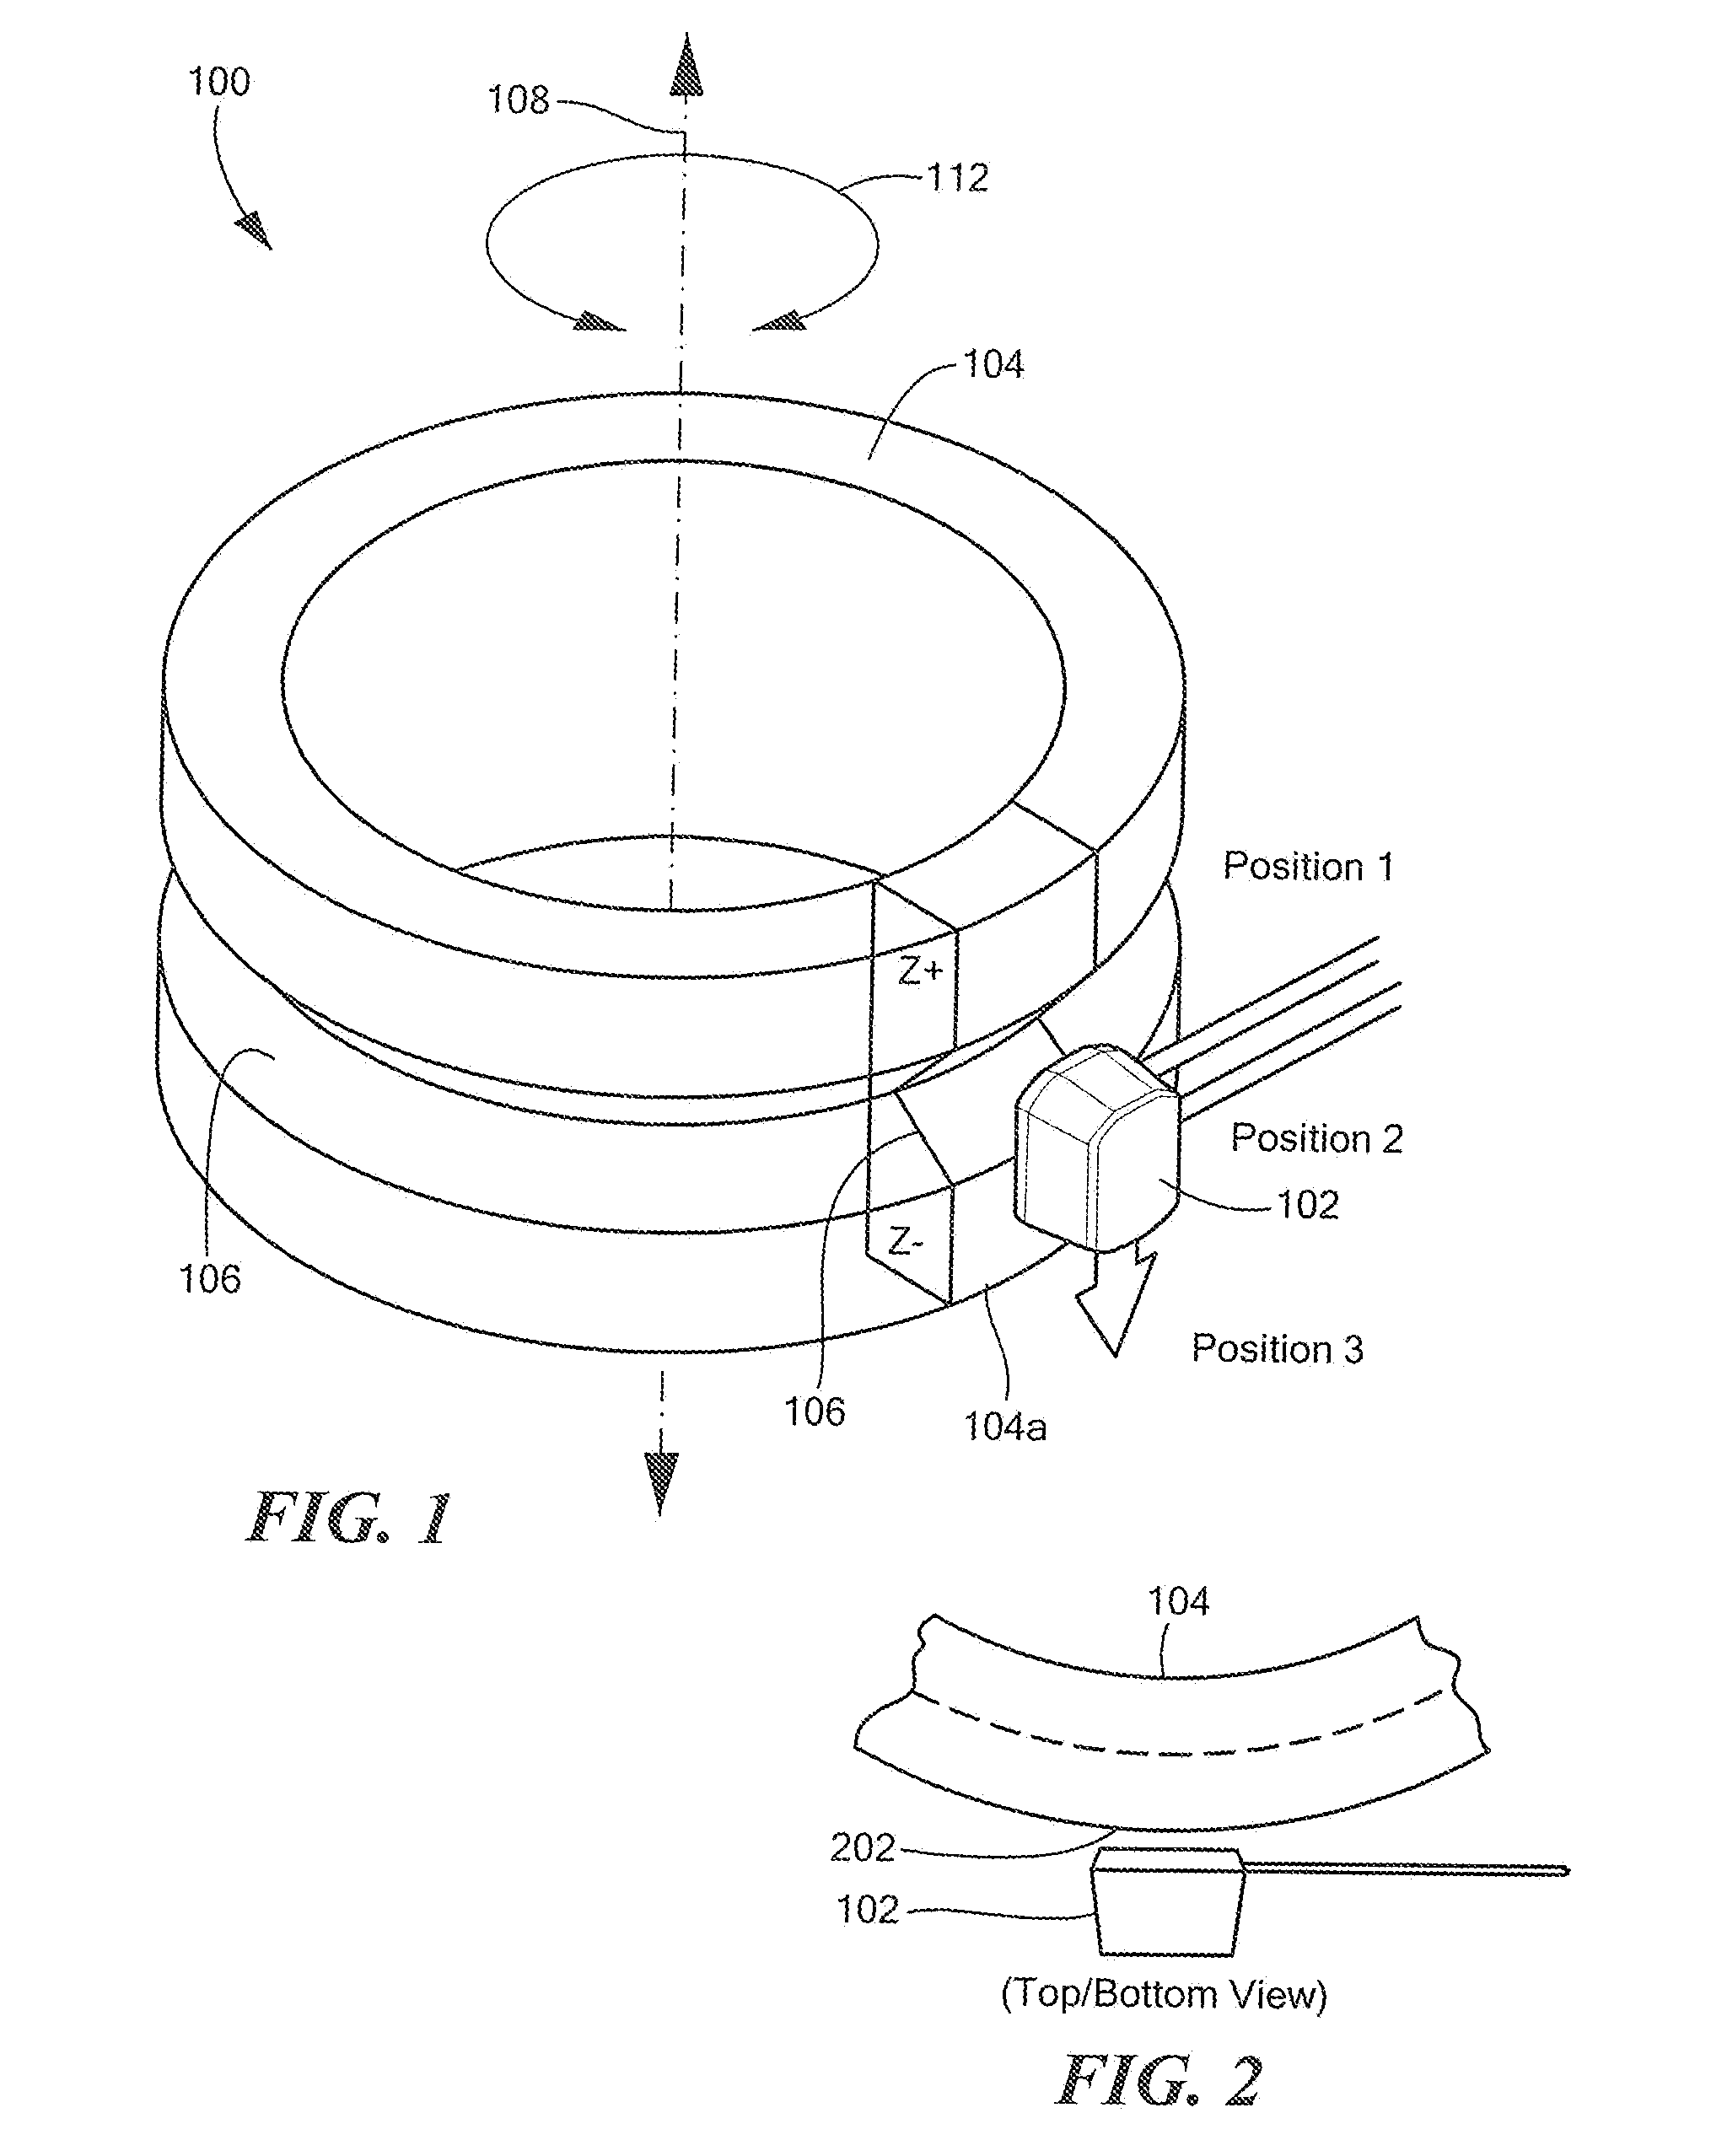 Magnetic Field Sensor and Method For Sensing Relative Location of the Magnetic Field Sensor and a Target Object Along a Movement Line